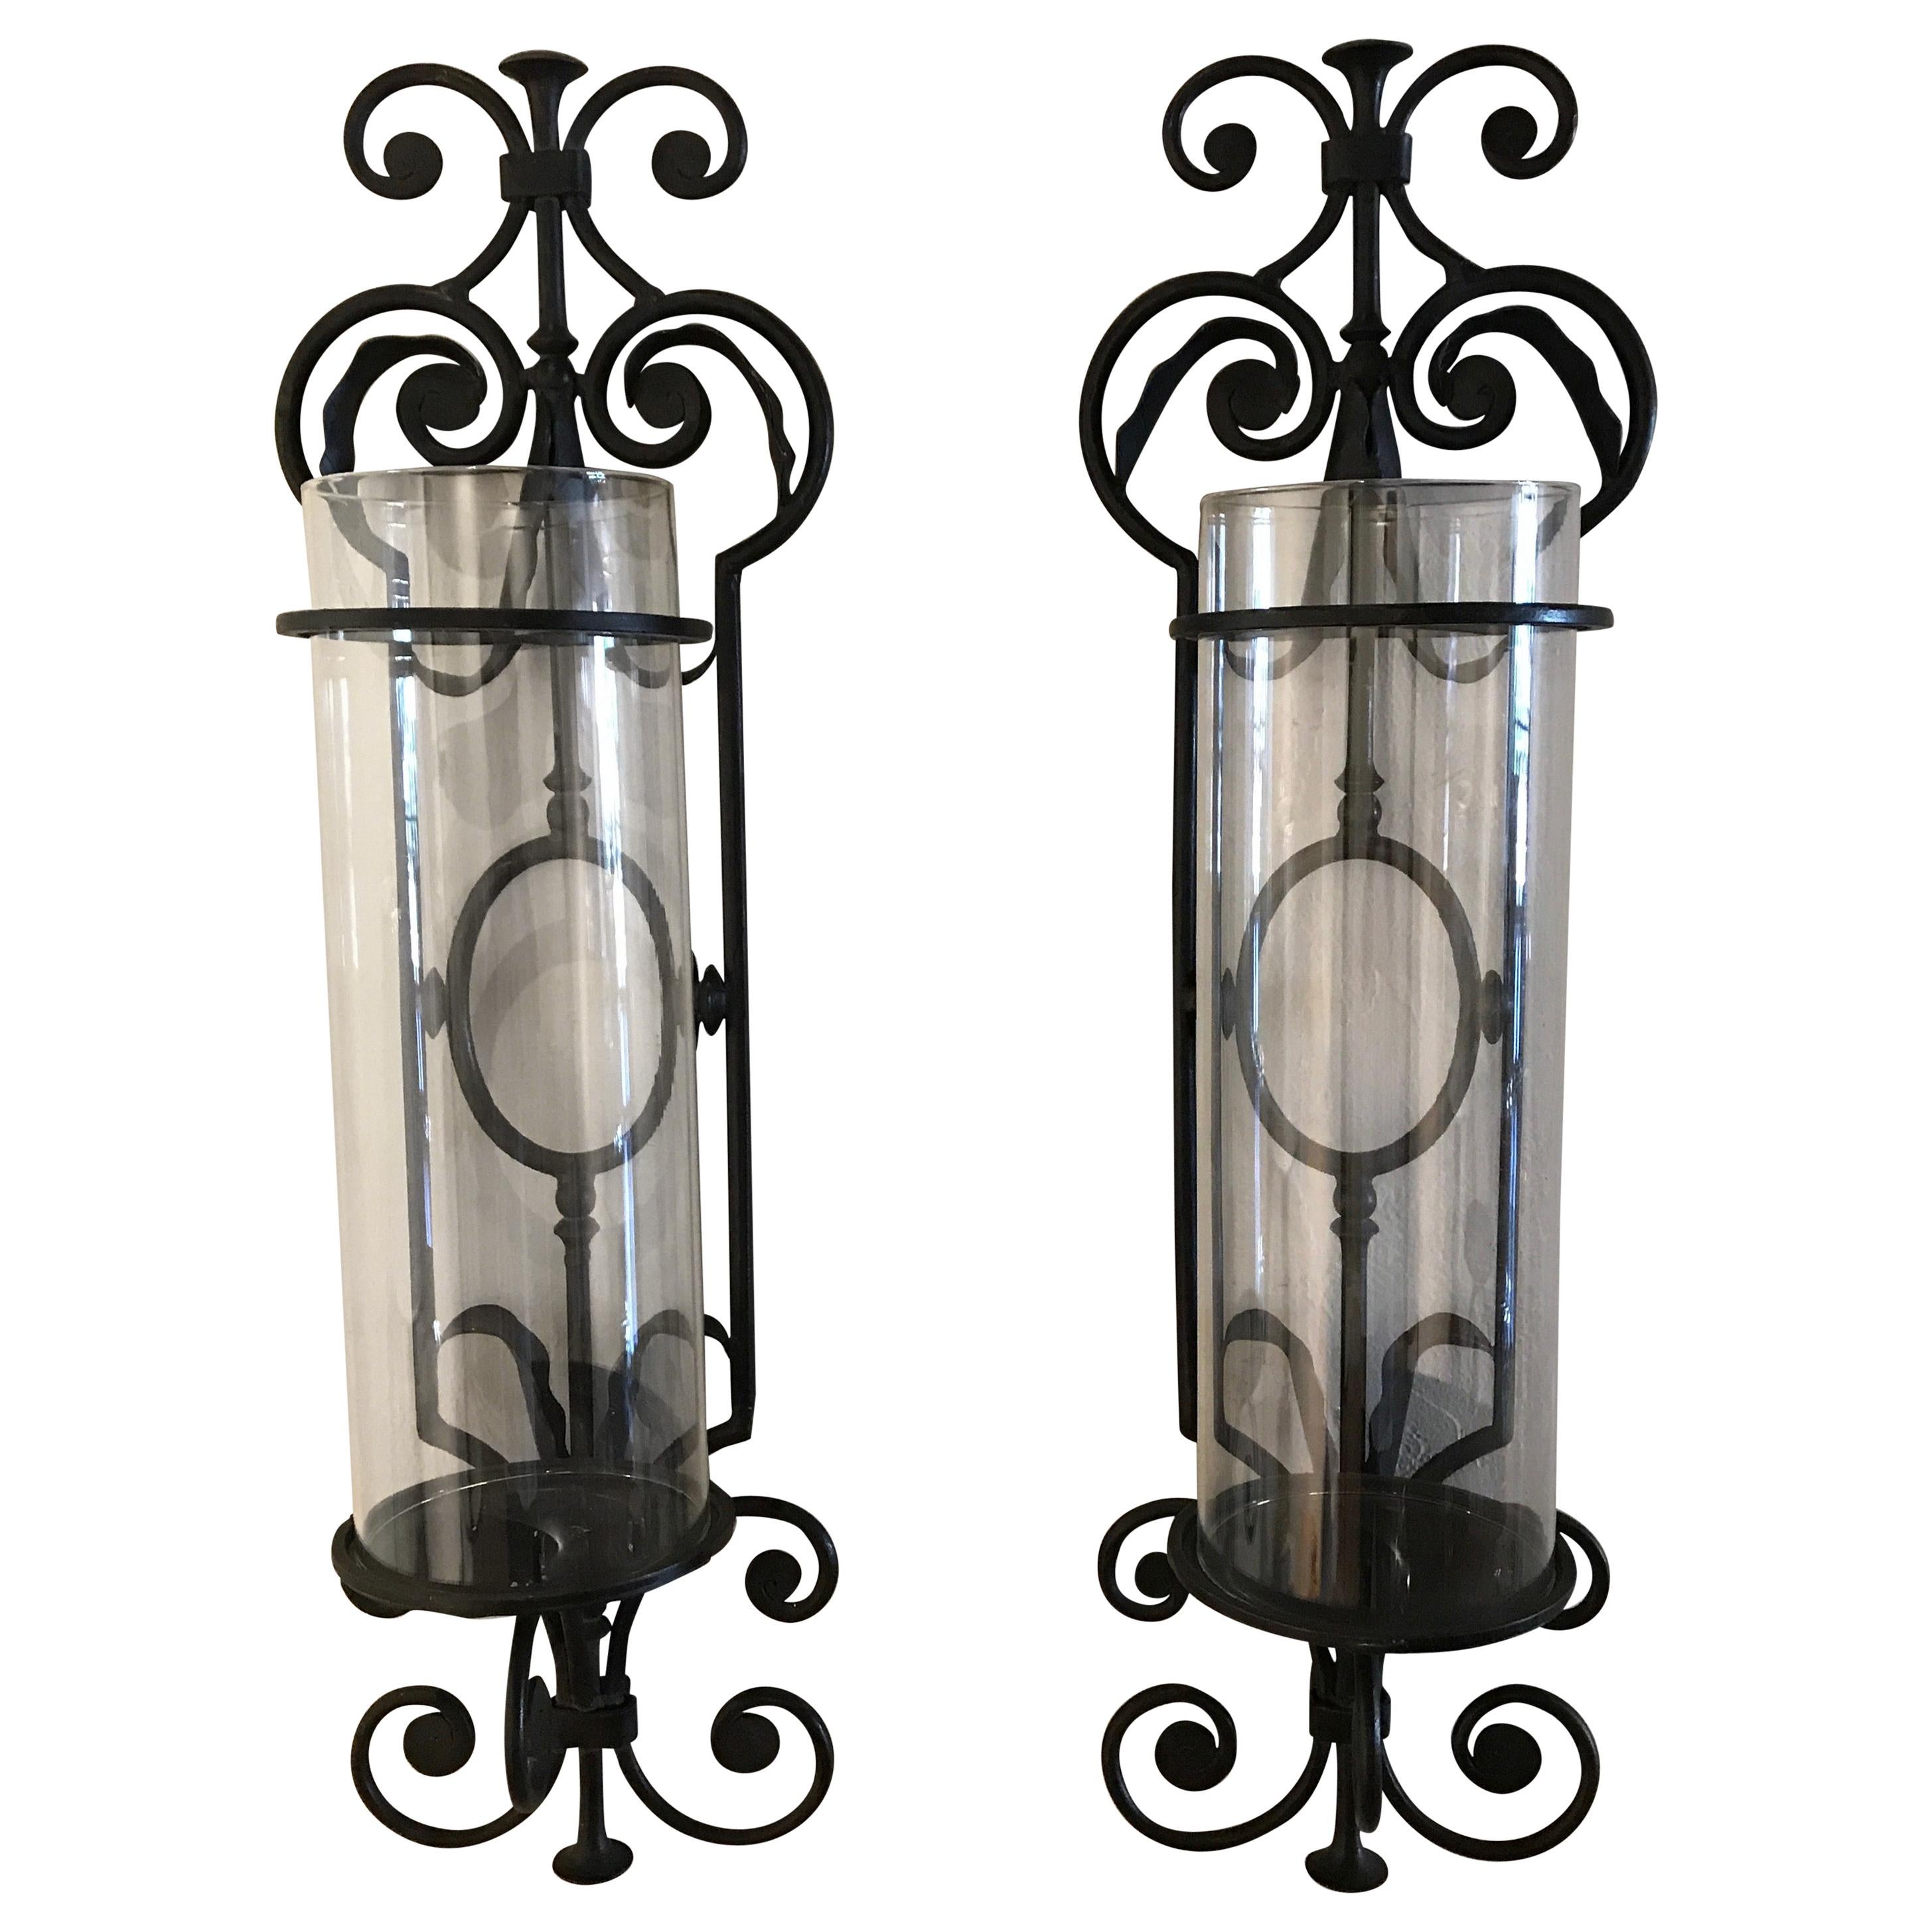 Pair of Vintage Iron and Glass Wall Mounted Hurricanes